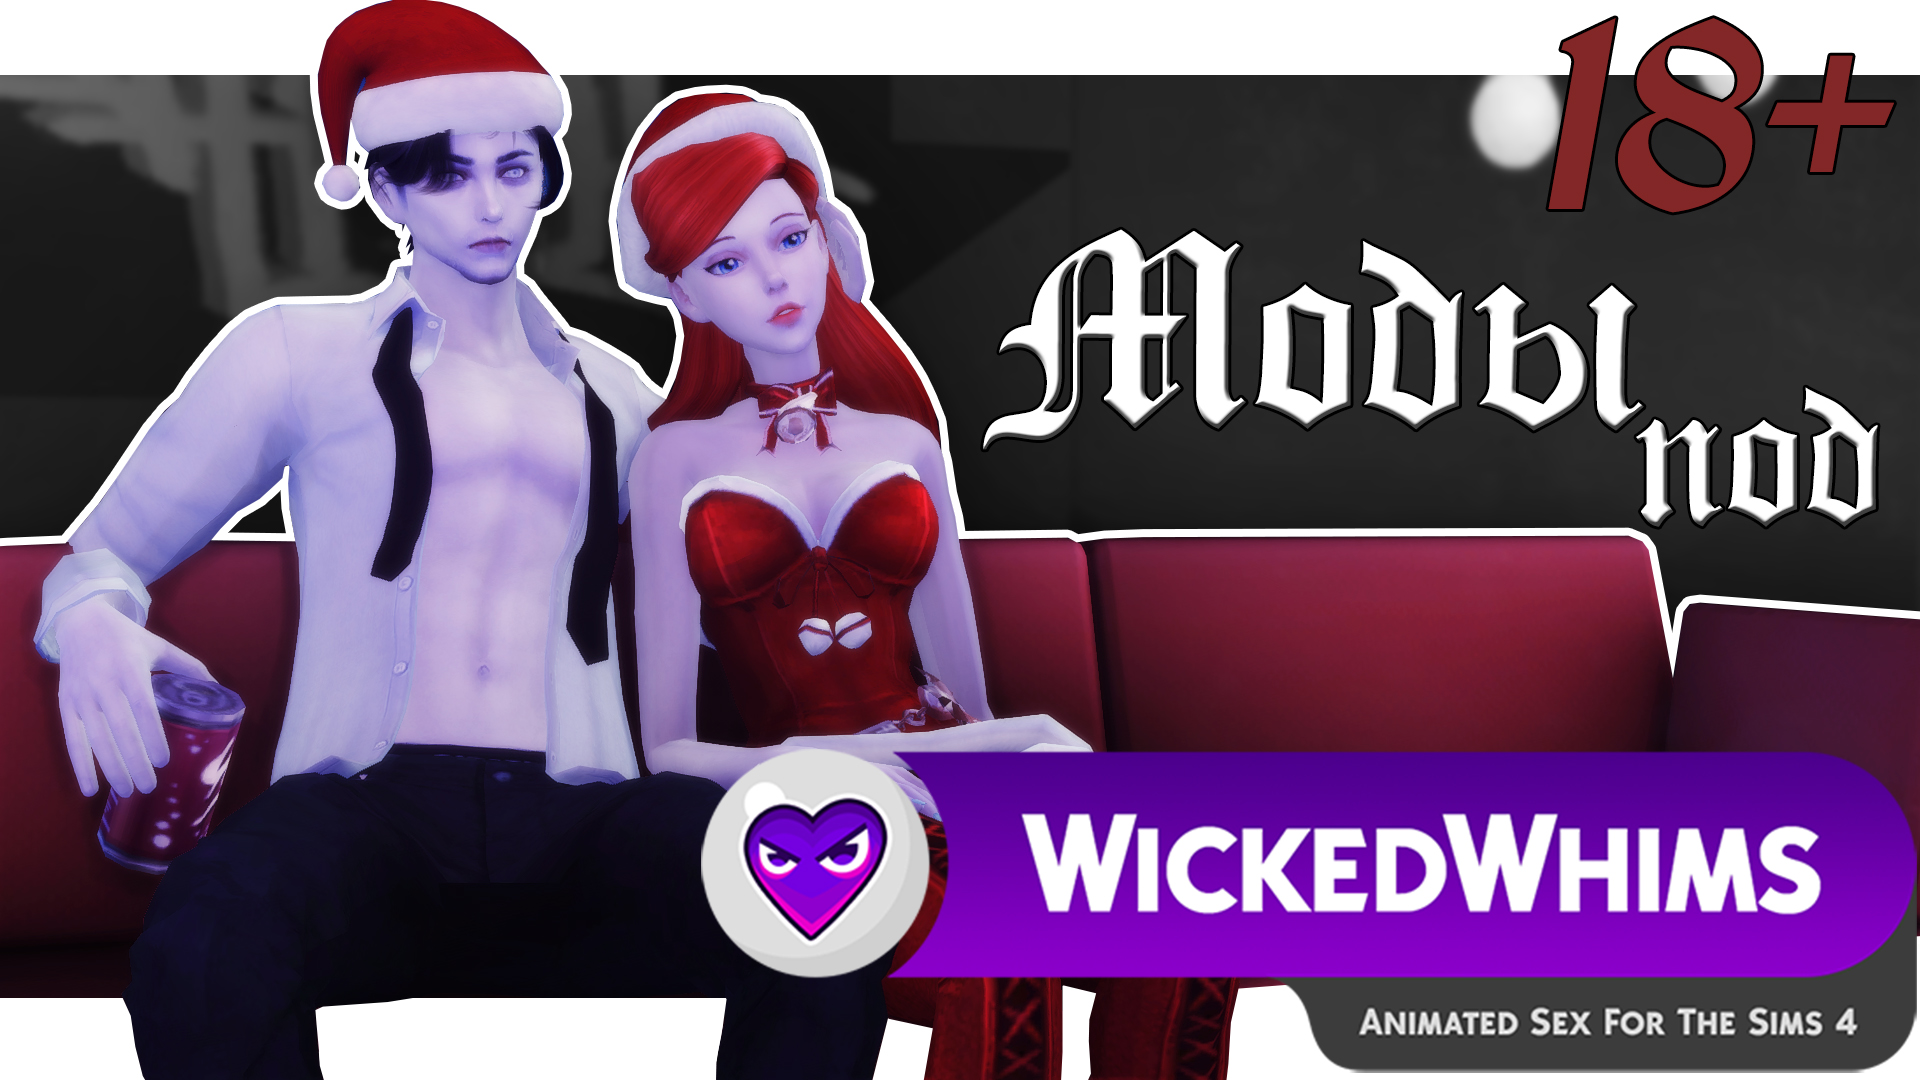 Wicked whims позы. Мод wickedwhims. Симс мод викед Вимс. Викедвимс симс 4. Мод симс 4 Wicked whims.